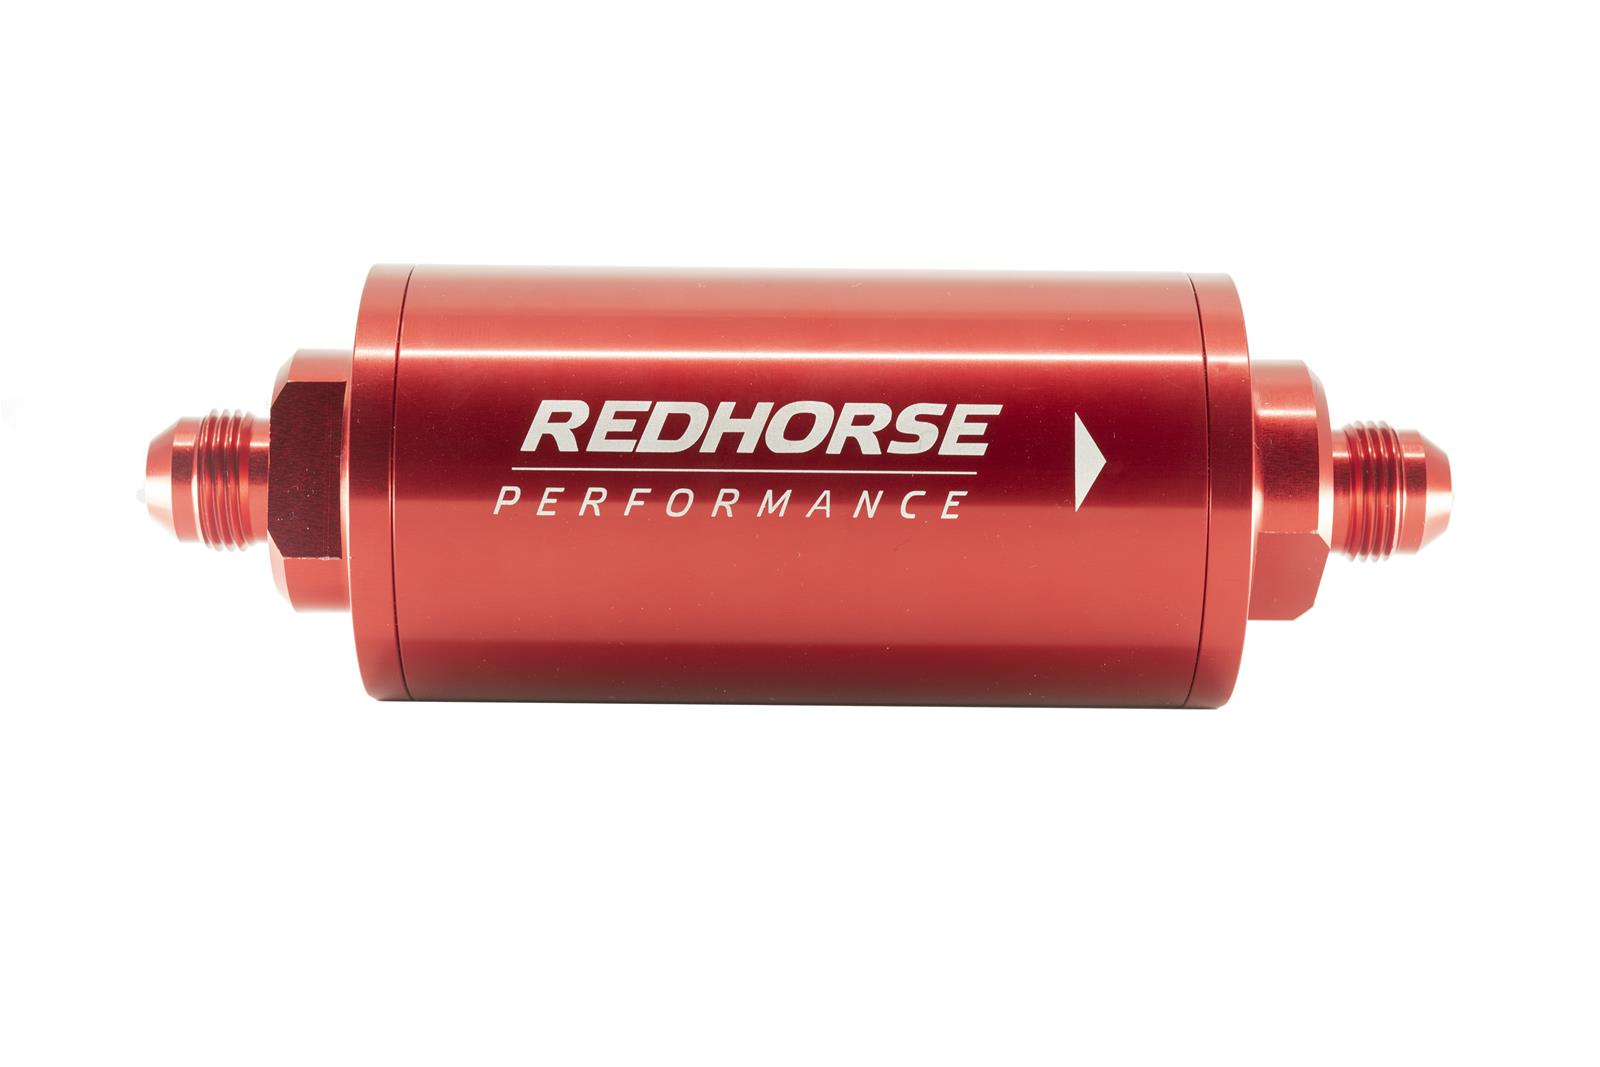 Redhorse Performance 4651-06-3-10 6in Cylindrical In-Line Race Fuel Filter w/ 10 Micron S.S. element - 06 AN - Red